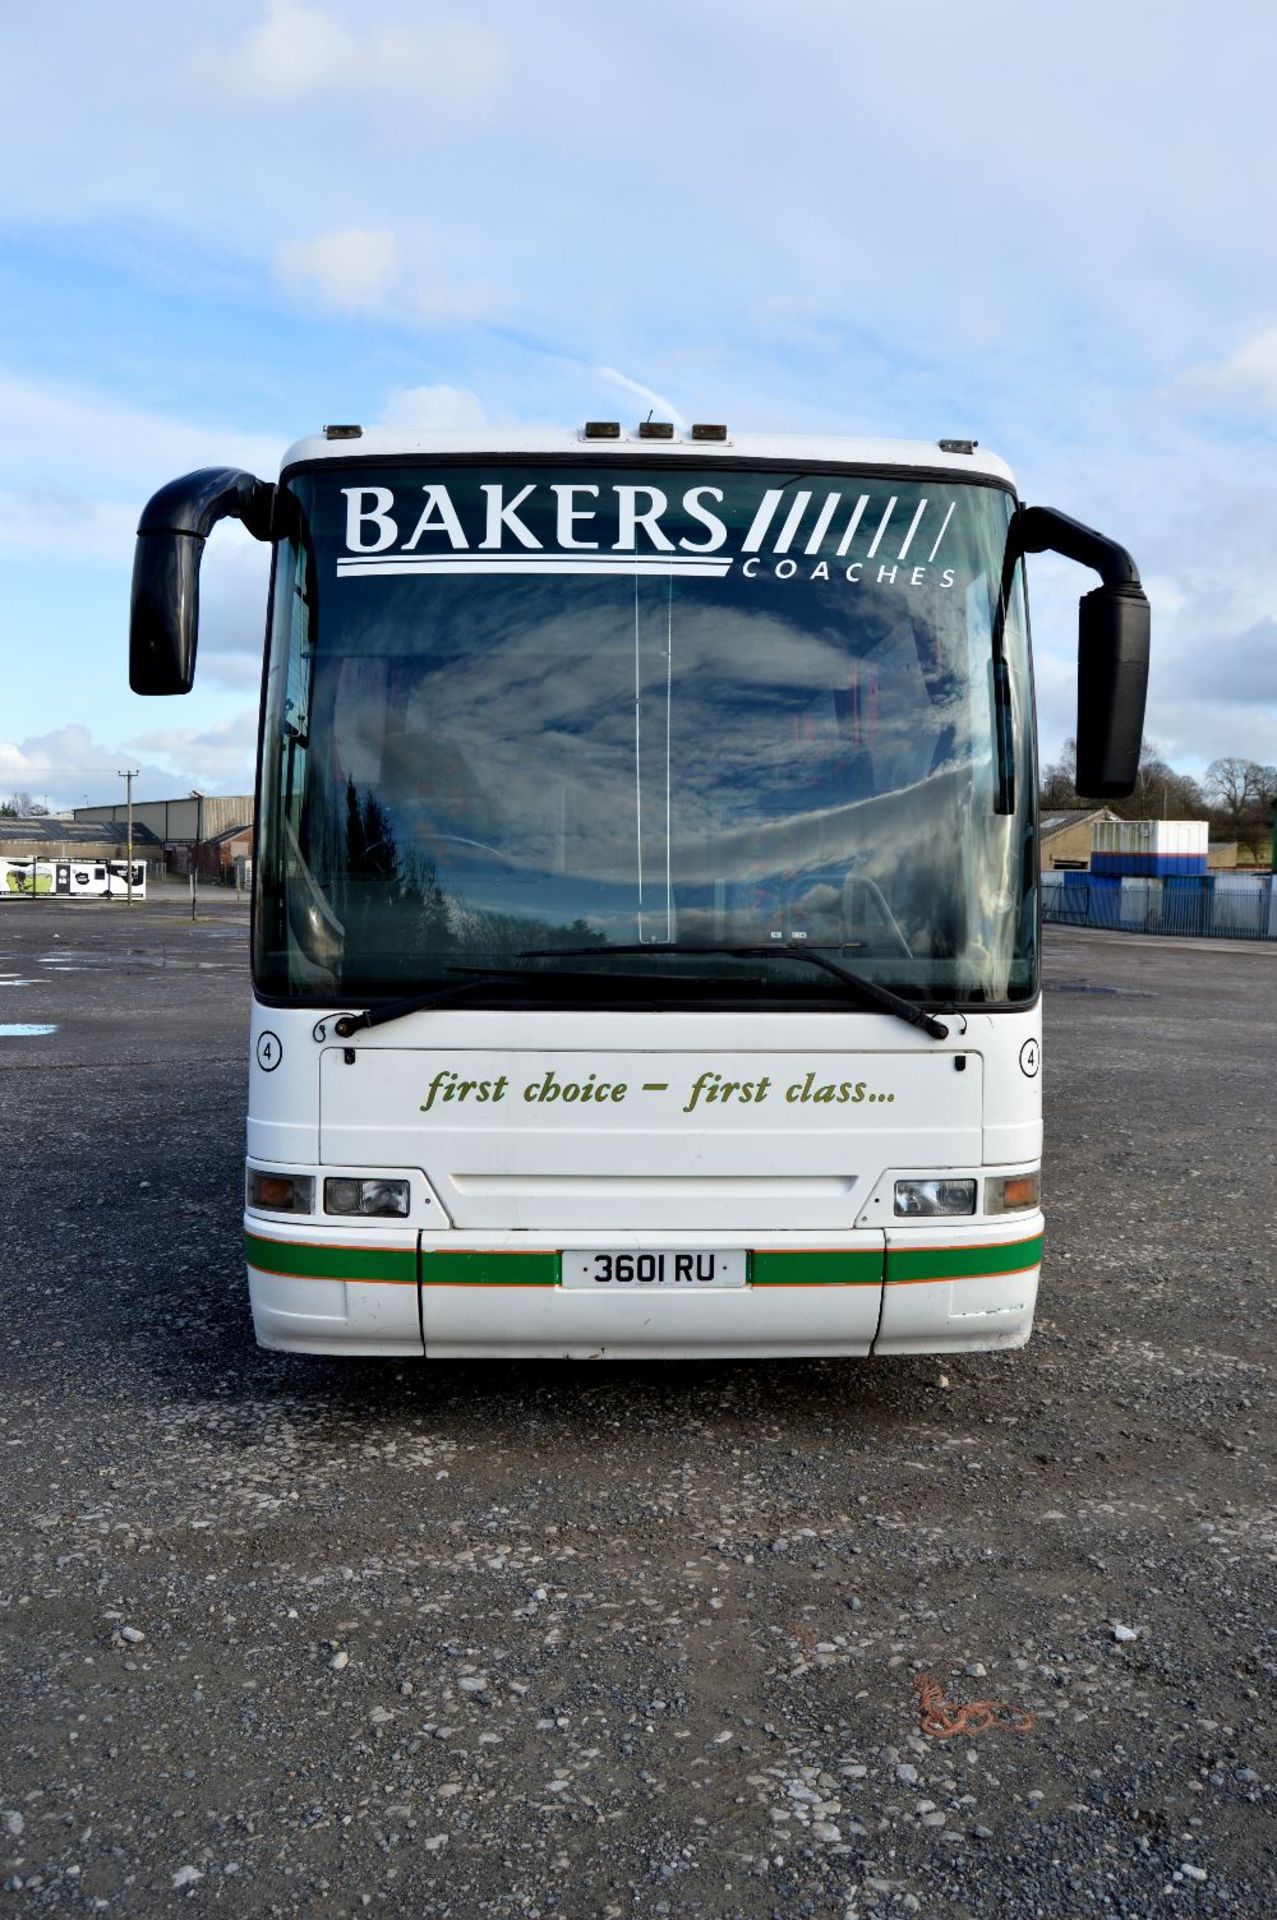 Volvo B10M Plaxton 57 seat luxury coach
Registration Number: 3601 RU
Date of First Registration: - Image 5 of 9